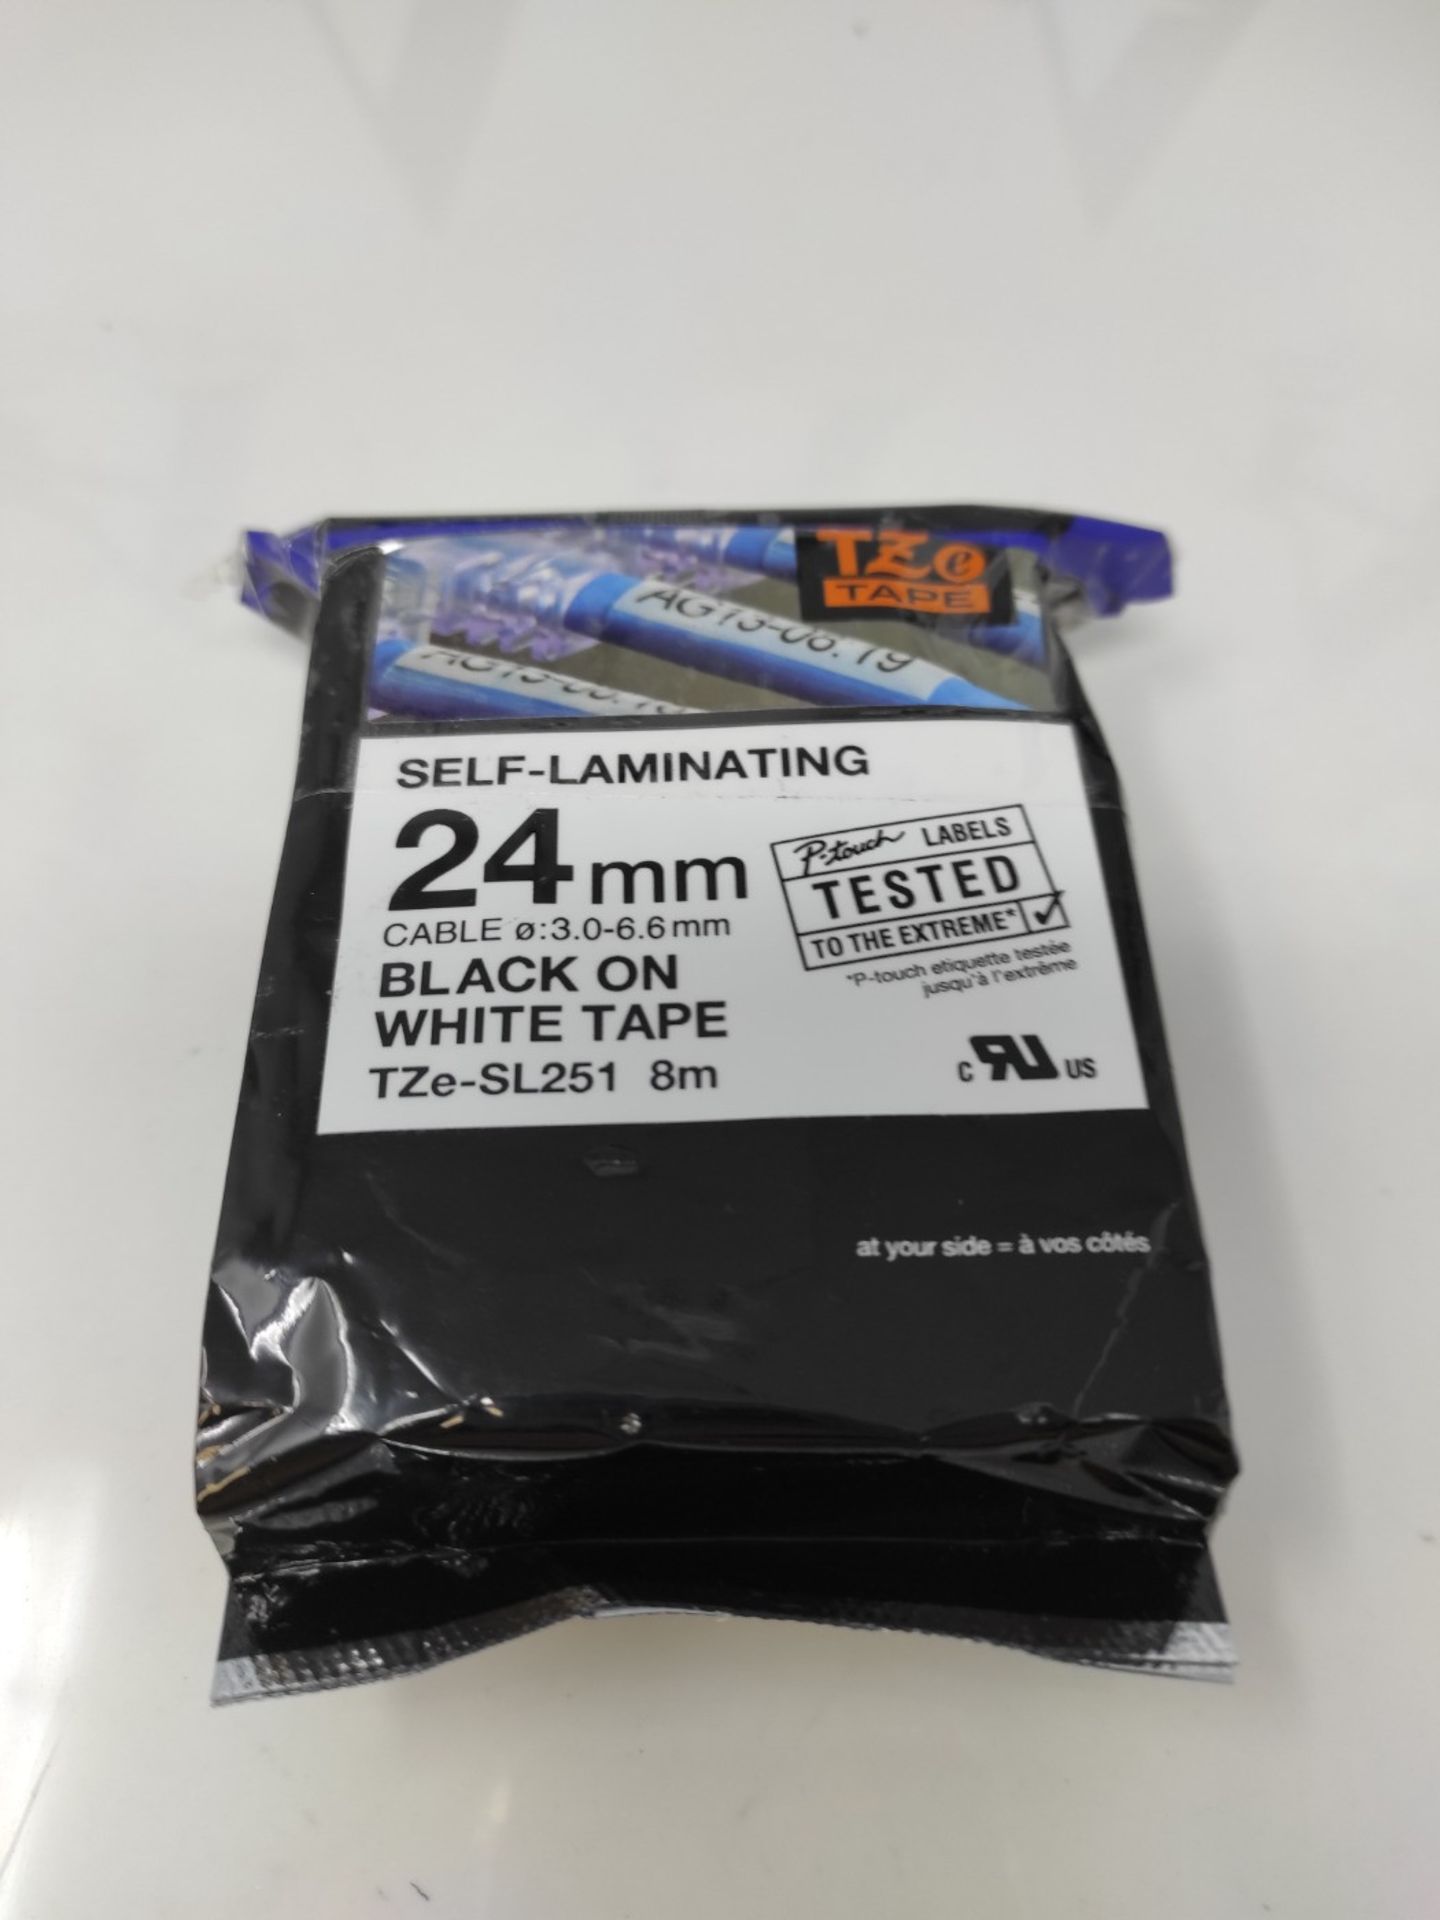 Genuine Brother TZe-SL251 Self Laminating Label Tape Black on White - 24mm Wide x 8m L - Image 2 of 3